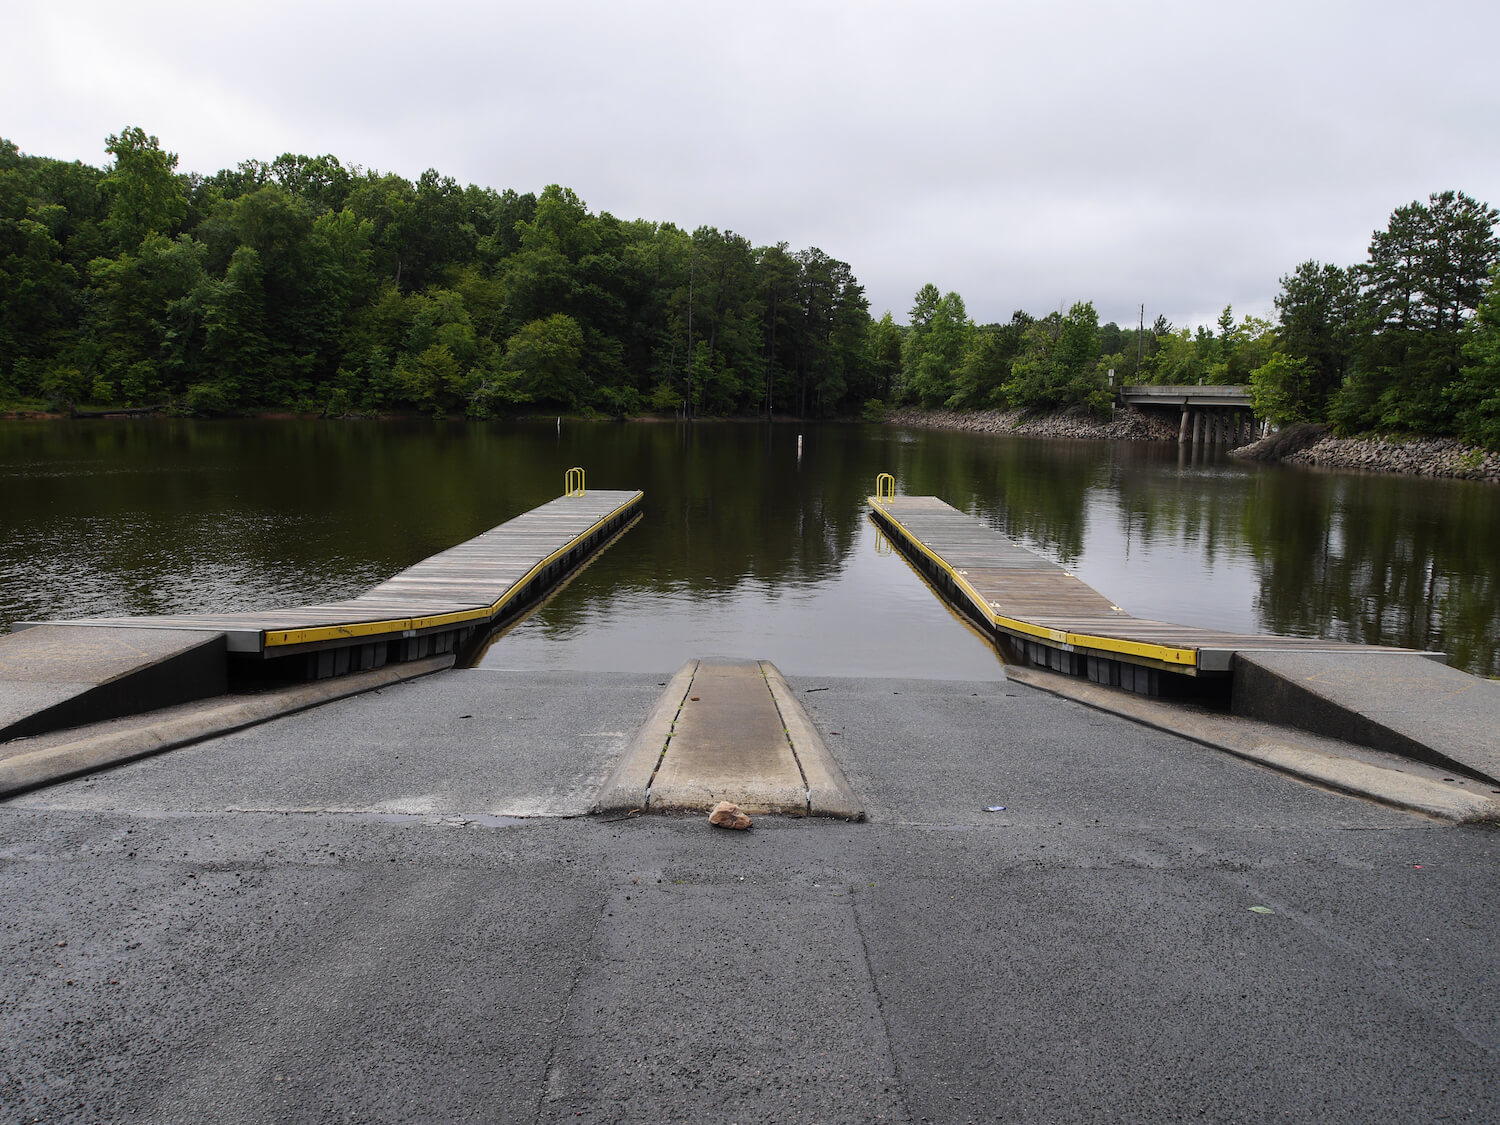 inspect-boat-ramp-guide-to-trailering-a-boat-09-2022 